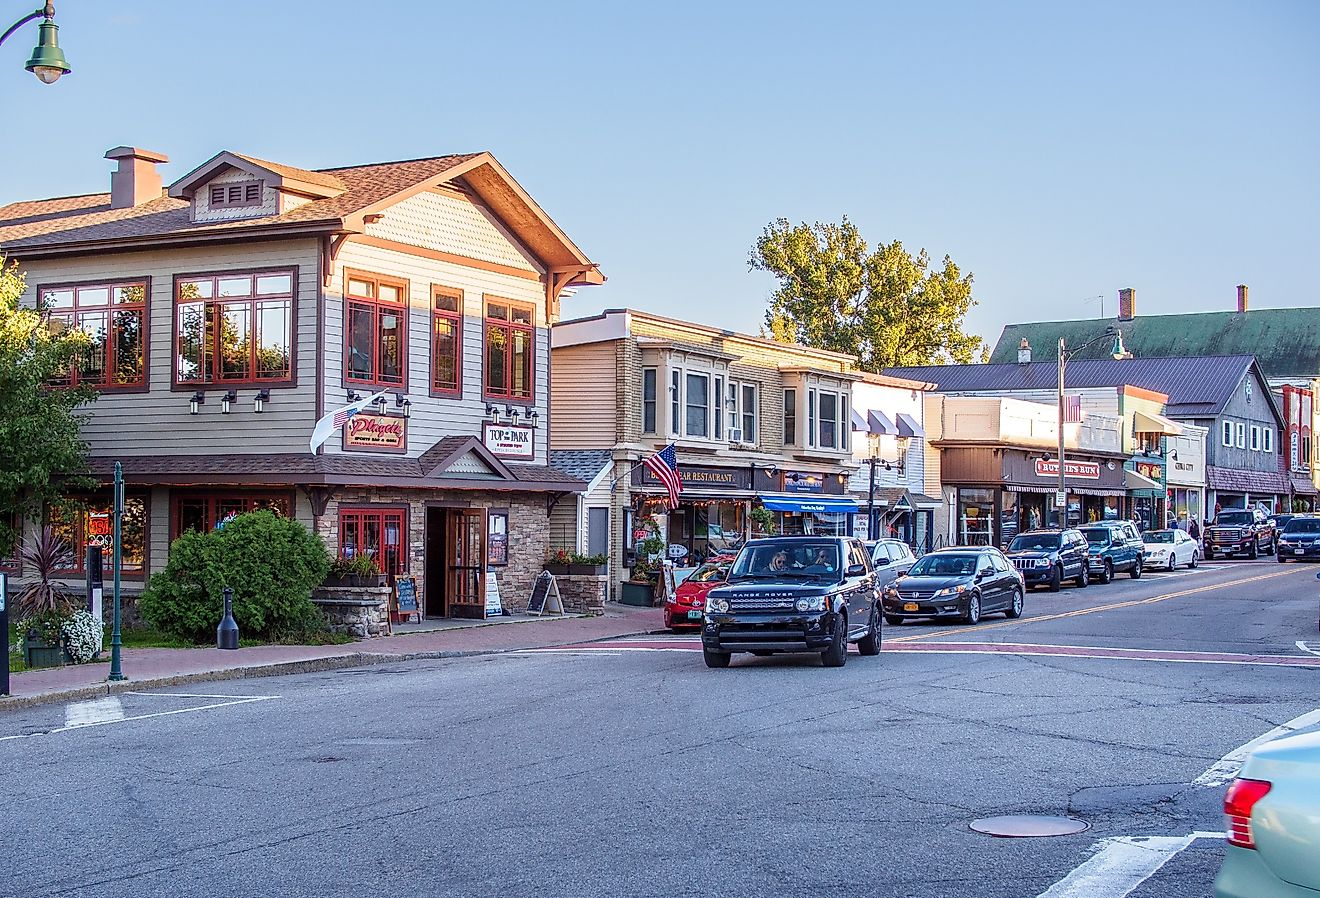 Main Street, located in Lake Placid in Upstate New York state. Image credit Karlsson Photo via Shutterstock